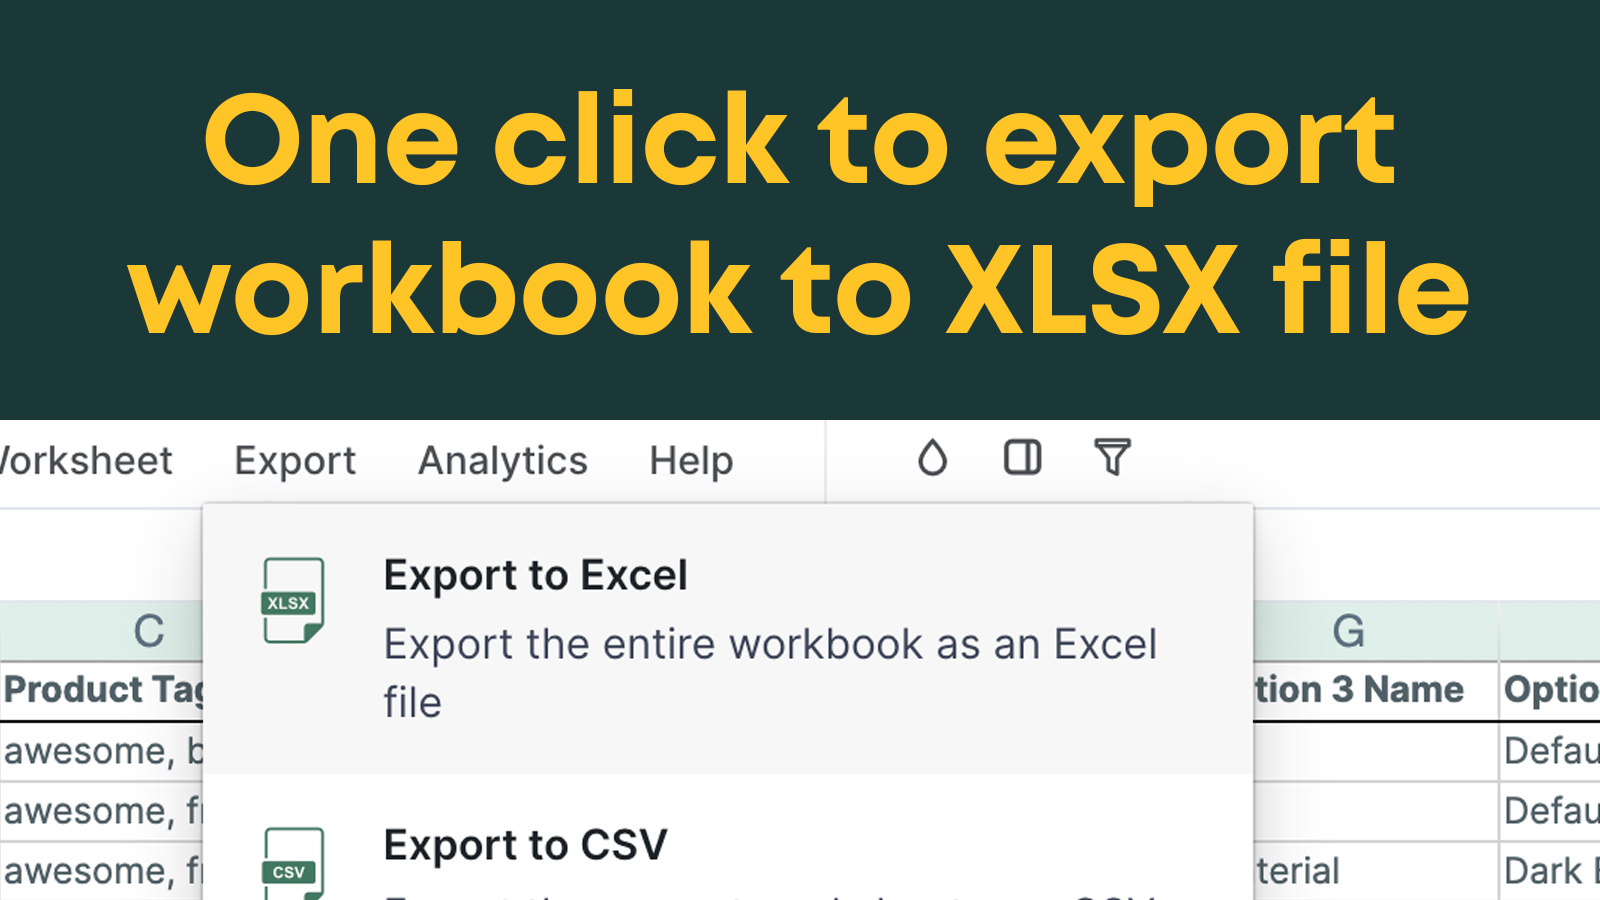 Full workbook export to XLSX, with images and formatting